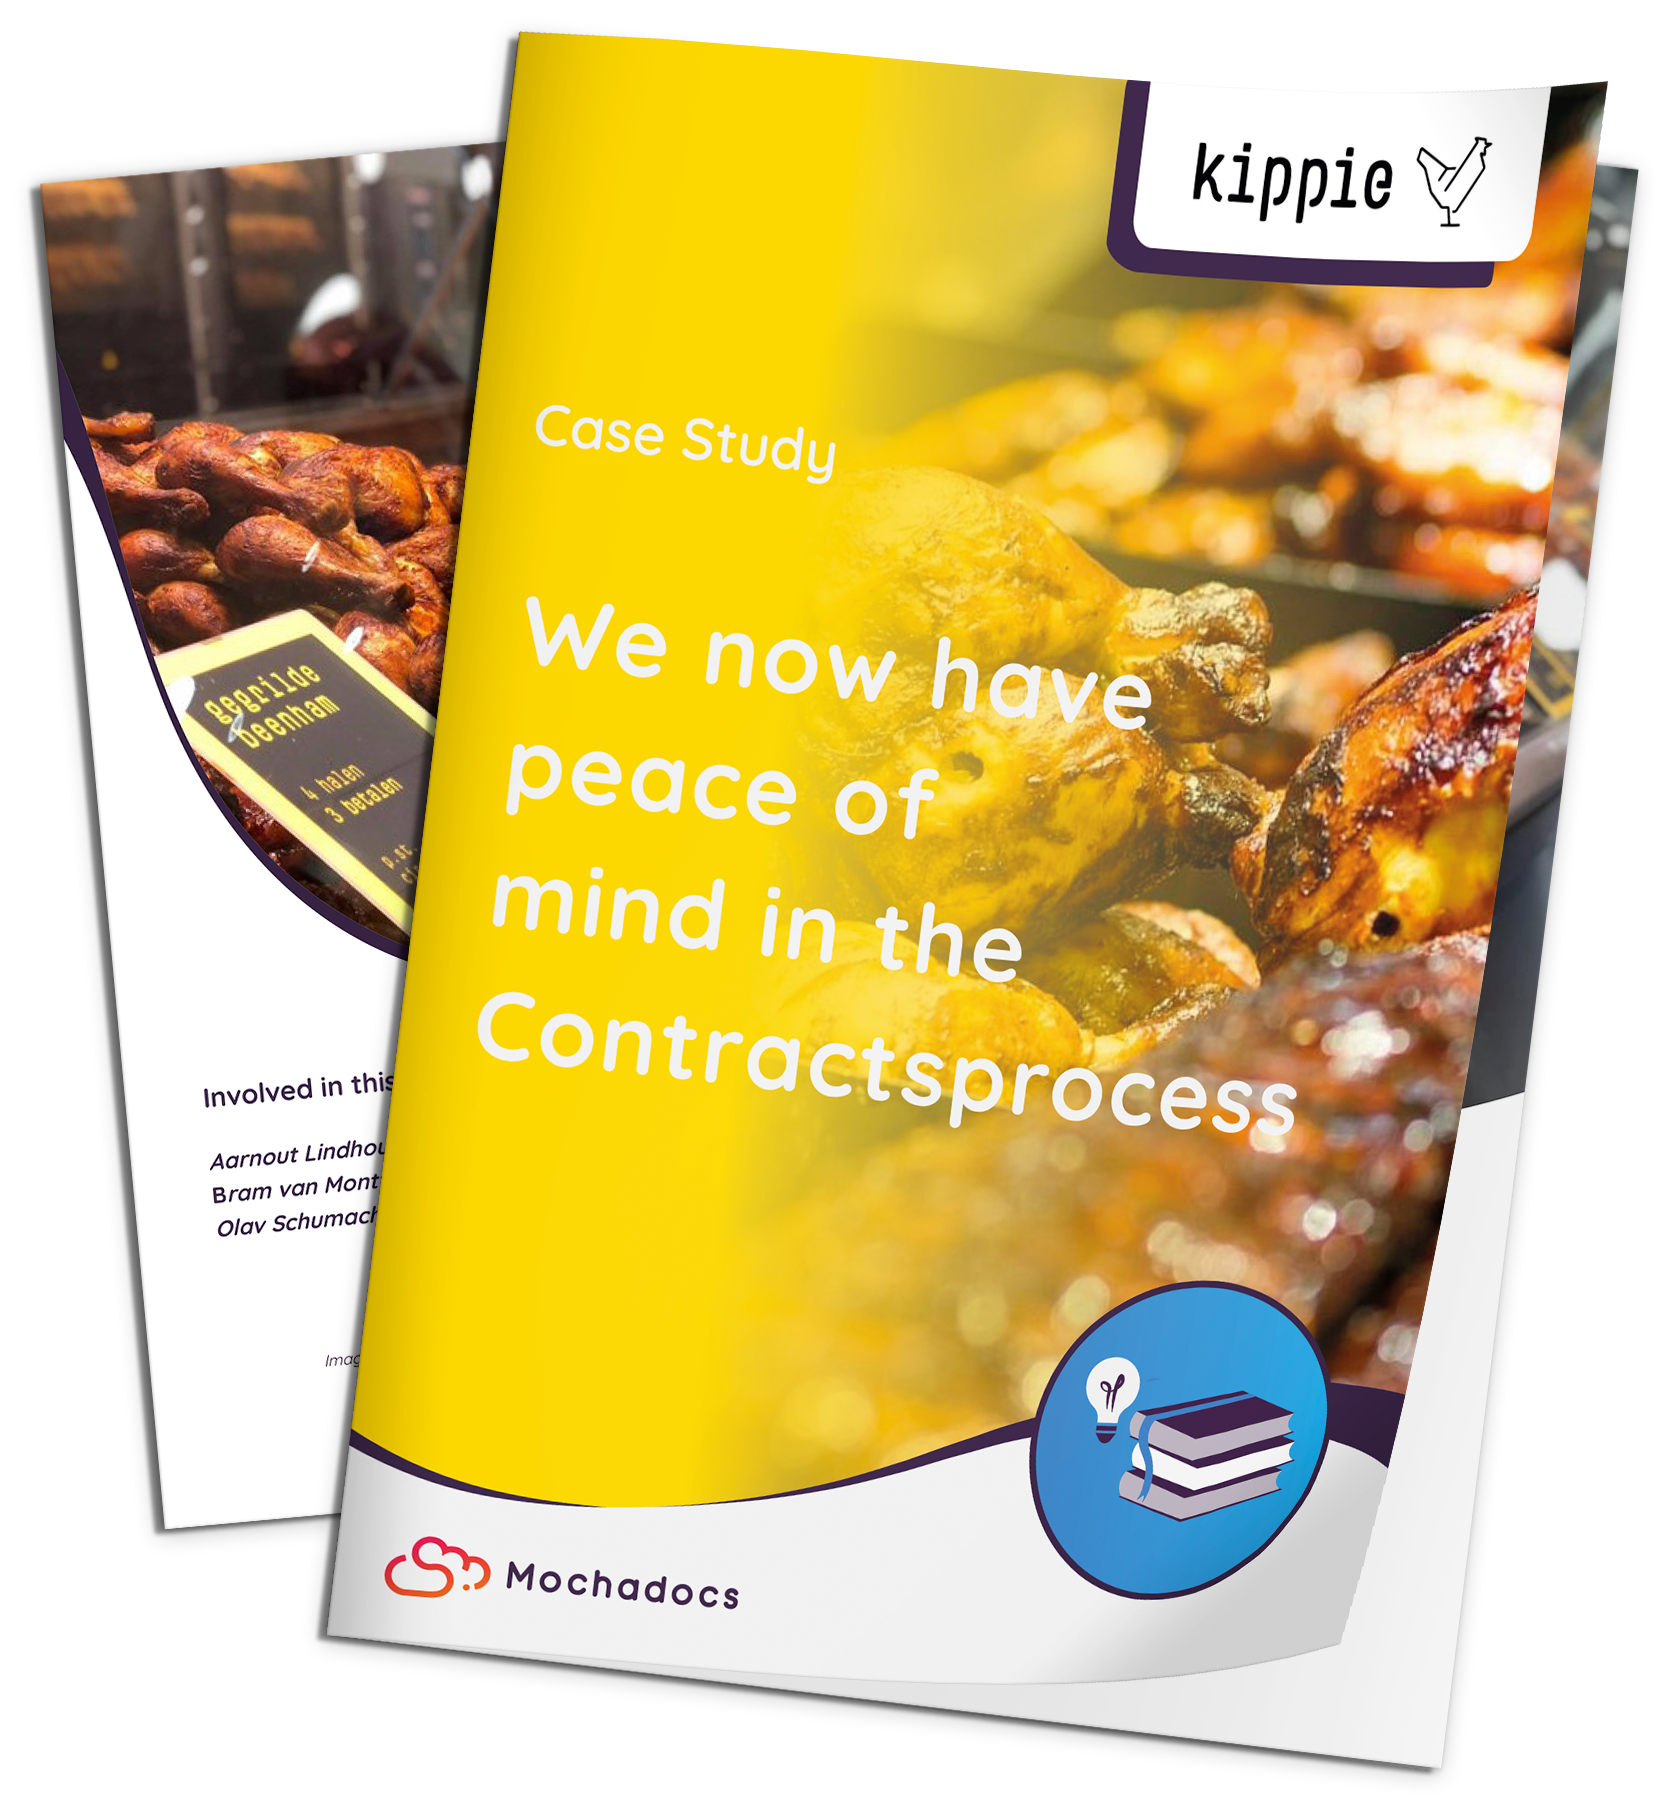 Mochadocs - Contract Management - Case Study - Kippie - We now have peace of mind in the contracts process